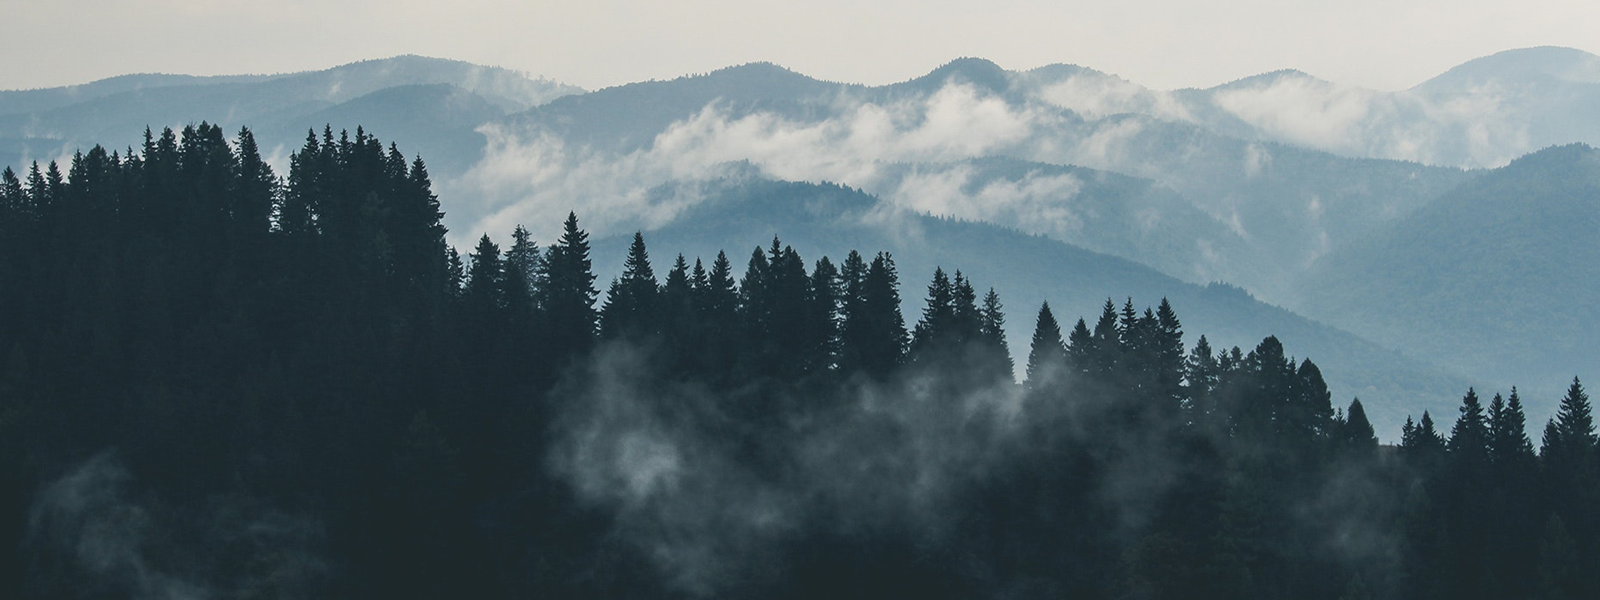 A dark forest in front of a mountain range covered by sparse clouds.